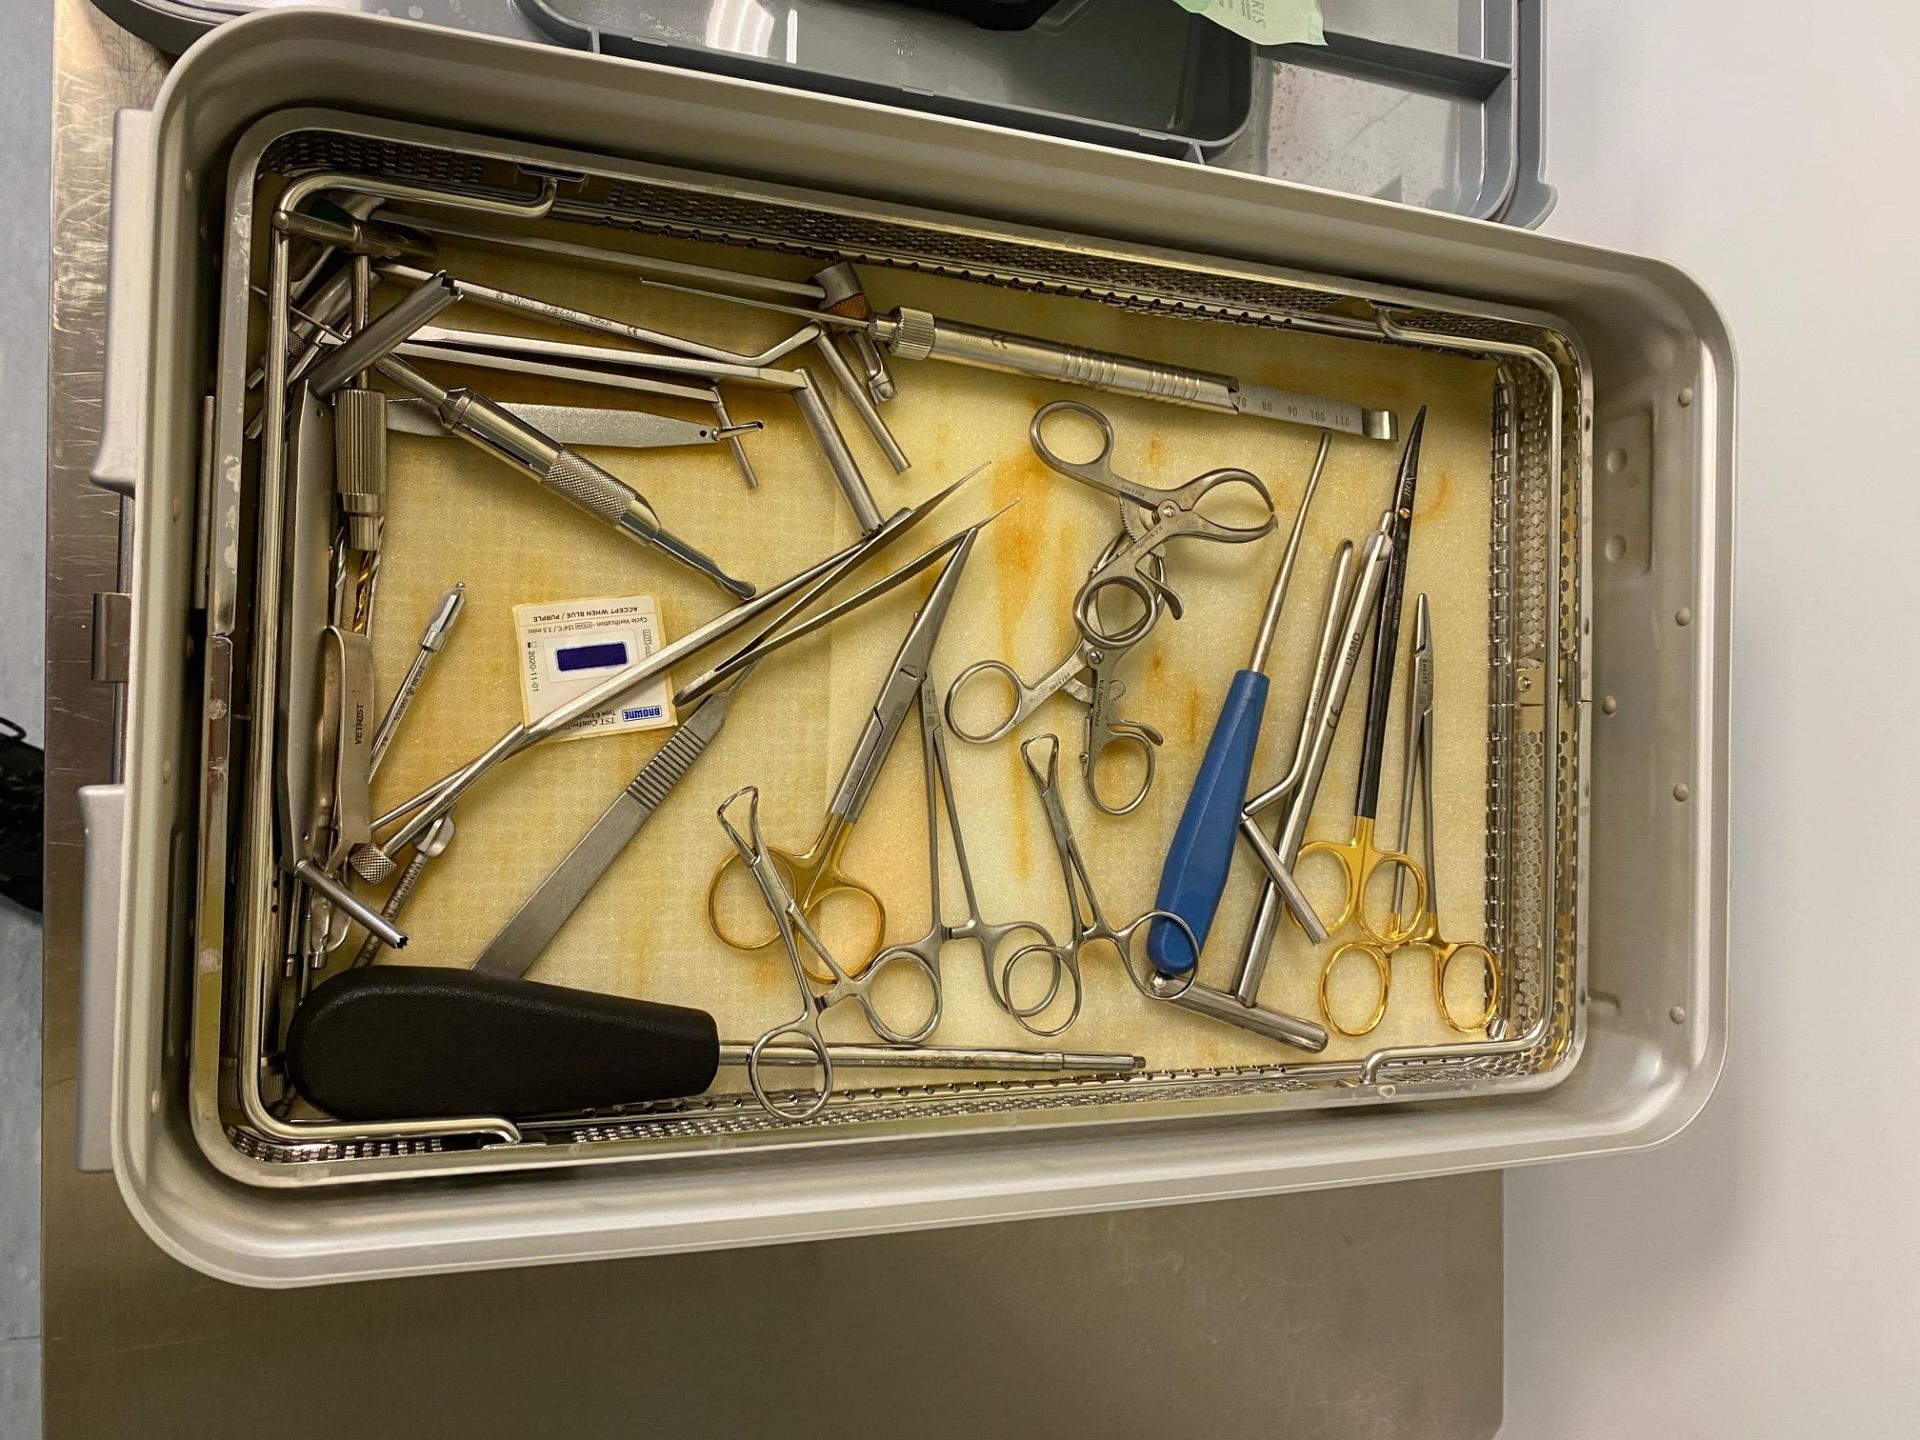 Aesculap surgical storage container including Dissecting scissors, surgical drills 2.7mm to 4. - Image 2 of 4